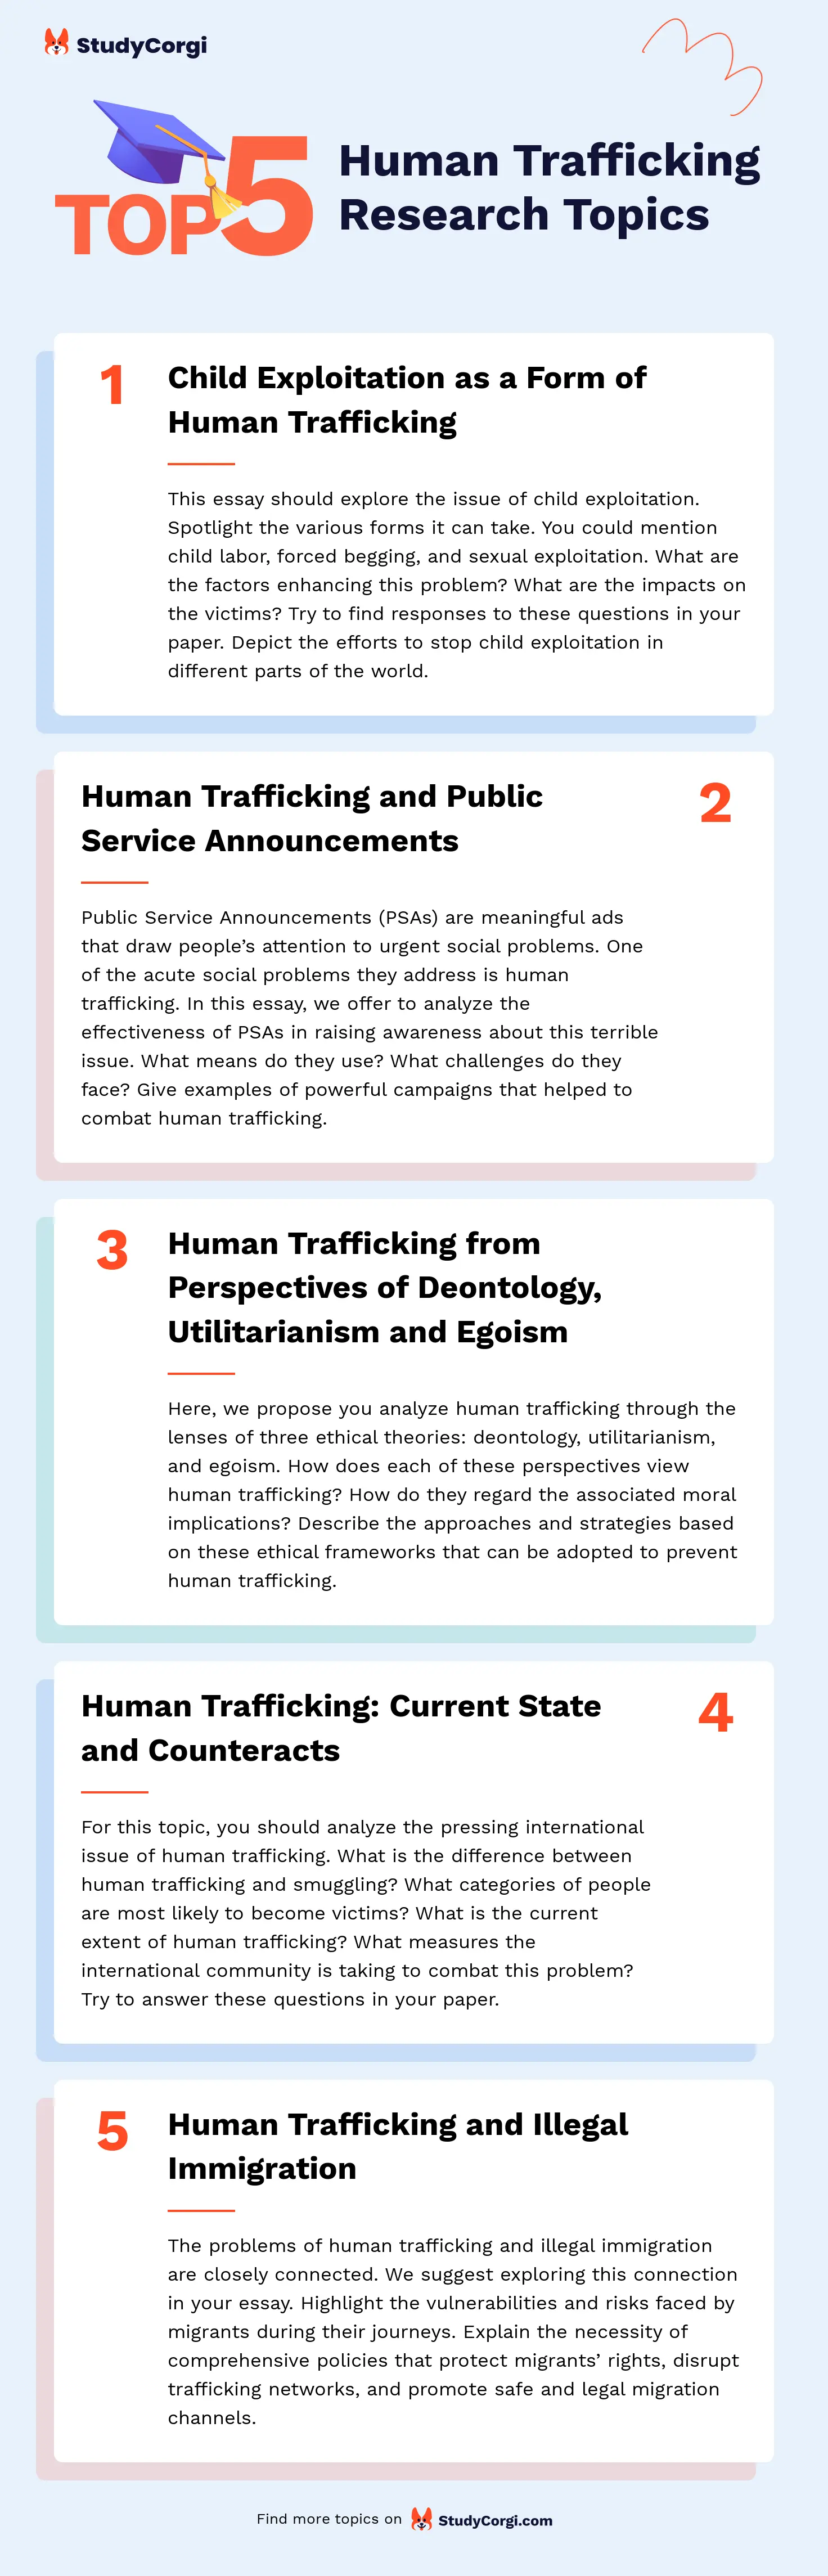 TOP-5 Human Trafficking Research Topics